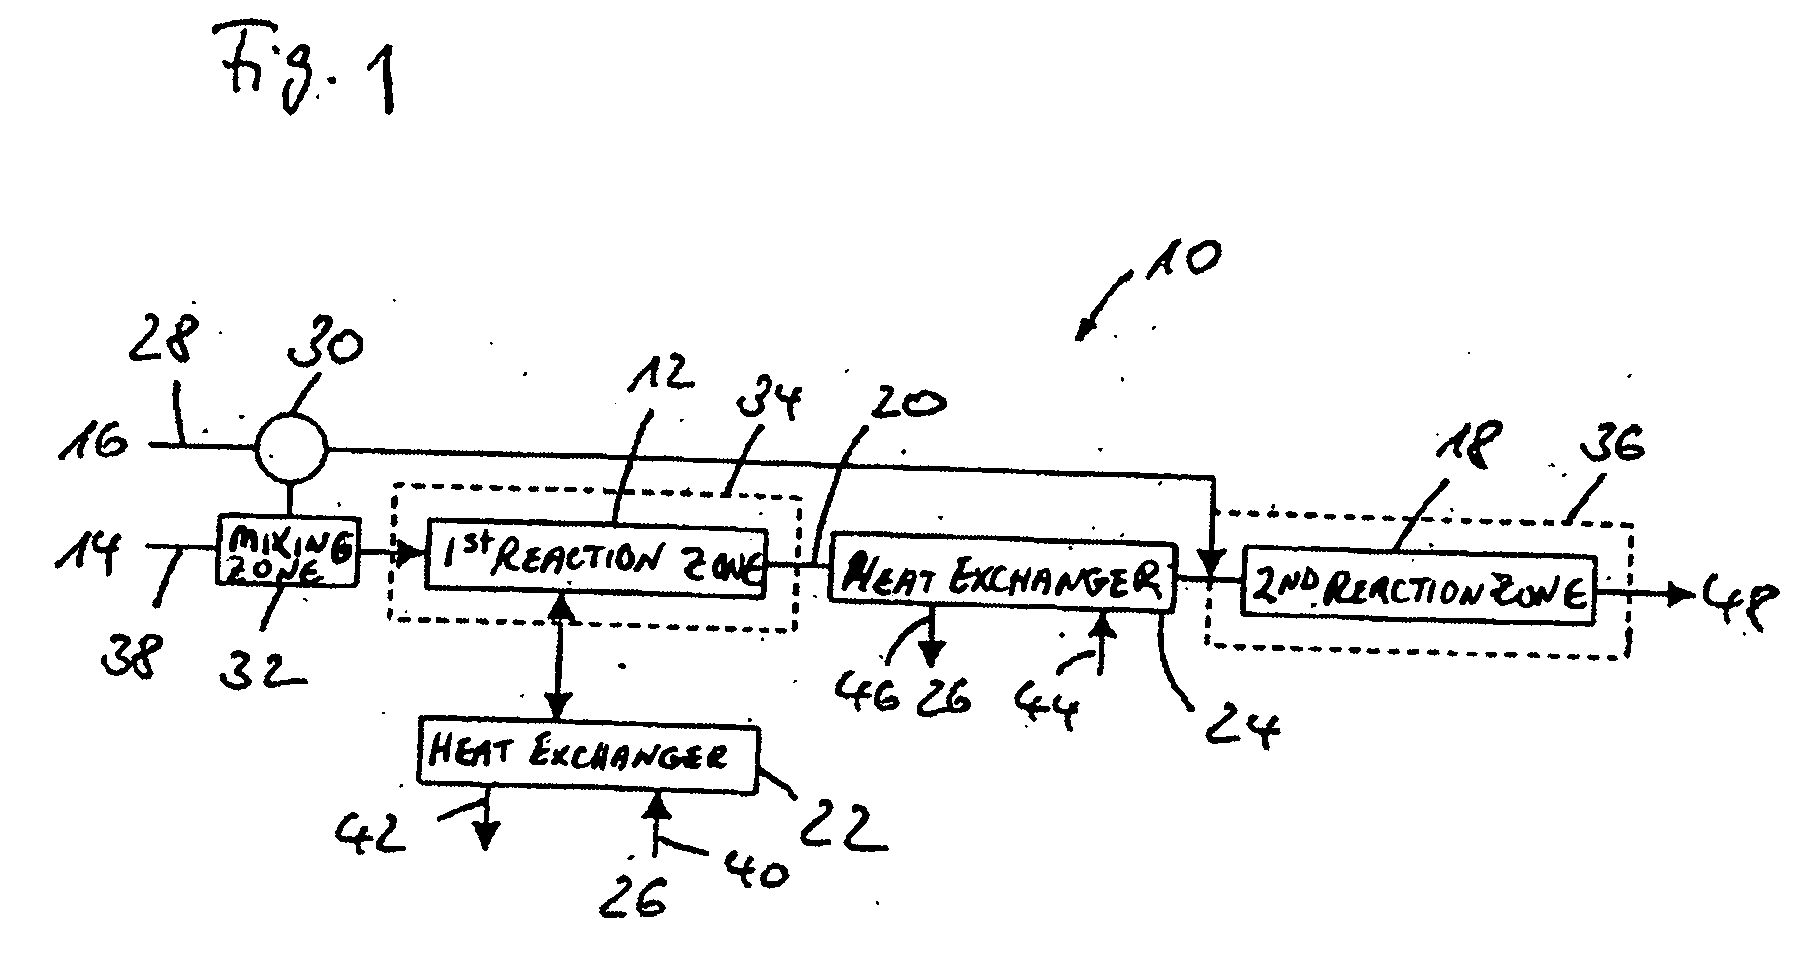 System and process for reacting fuel and oxidizer into reformate